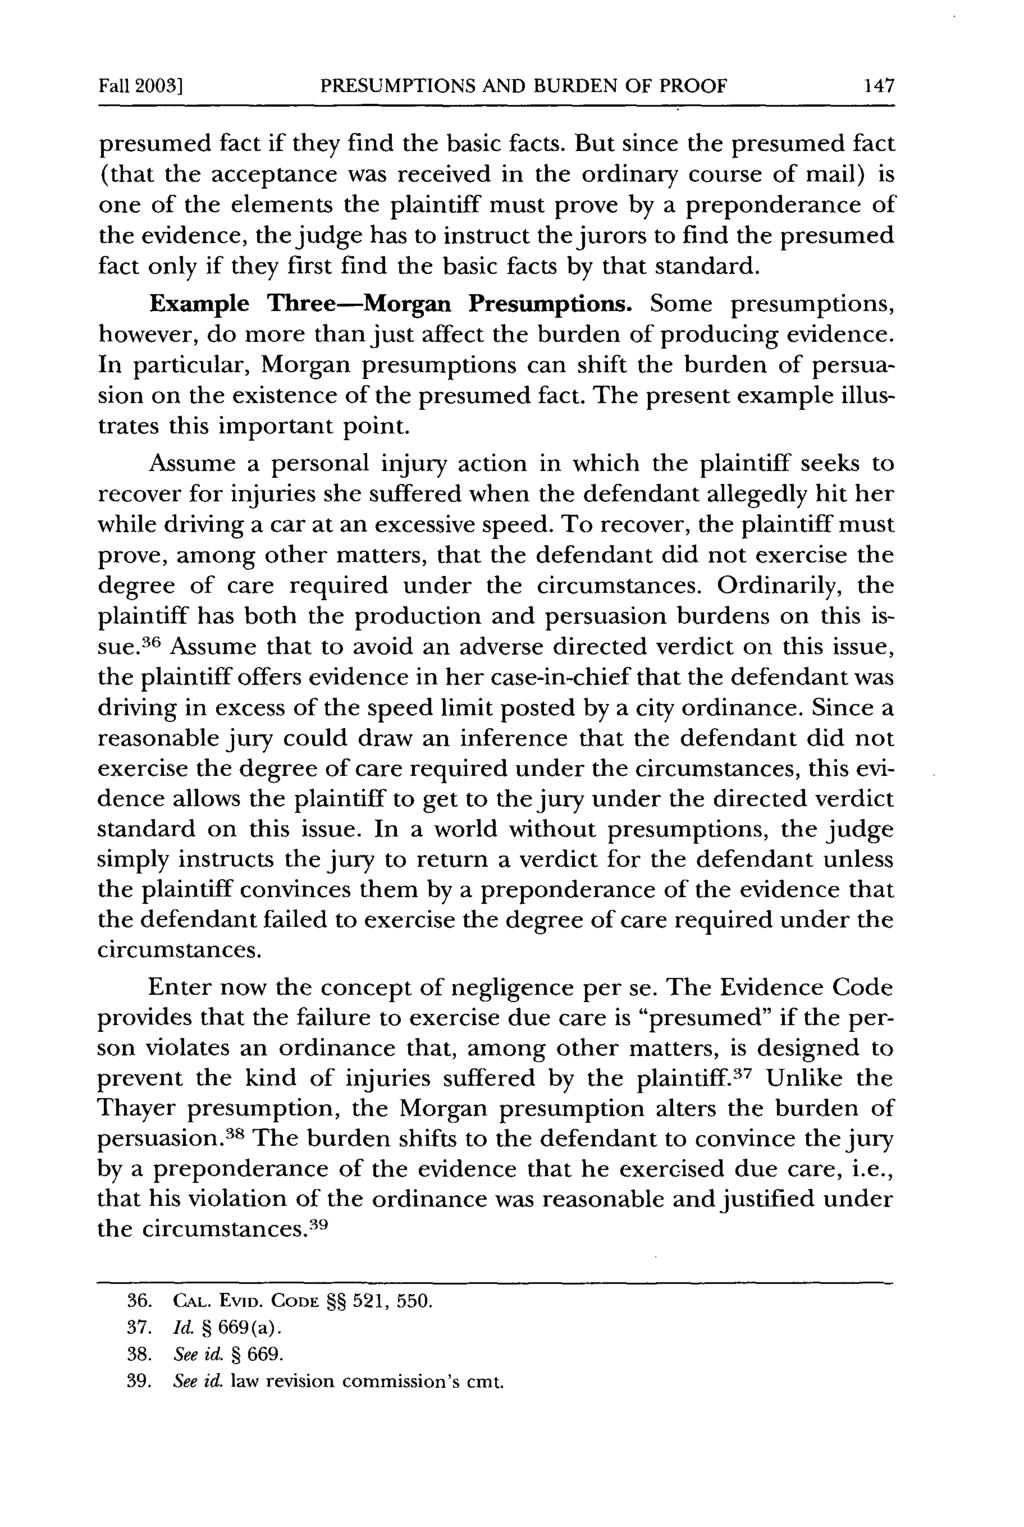 Fall 2003] PRESUMPTIONS AND BURDEN OF PROOF presumed fact if they find the basic facts.